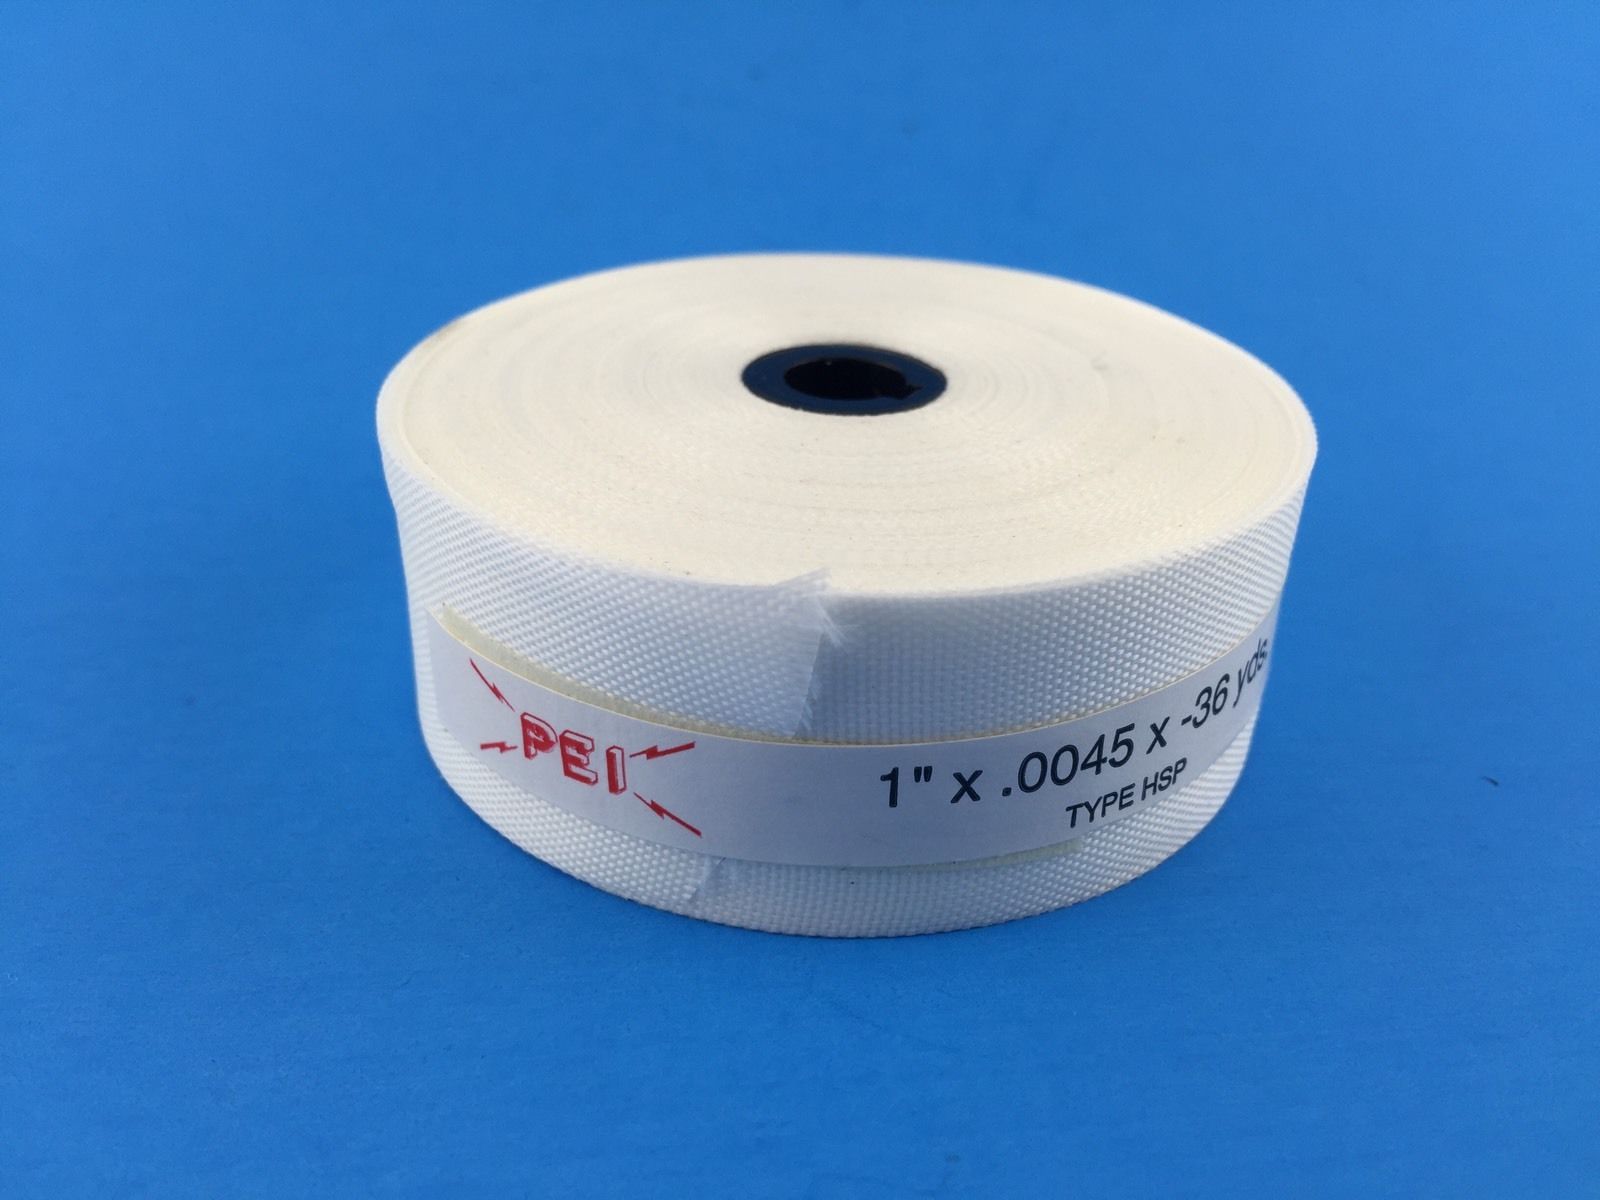 1/2" HSP 1236 .005" thick Heat Shrinkable Polyester Tape 155°C, white, 1/2" wide x  36 YD roll